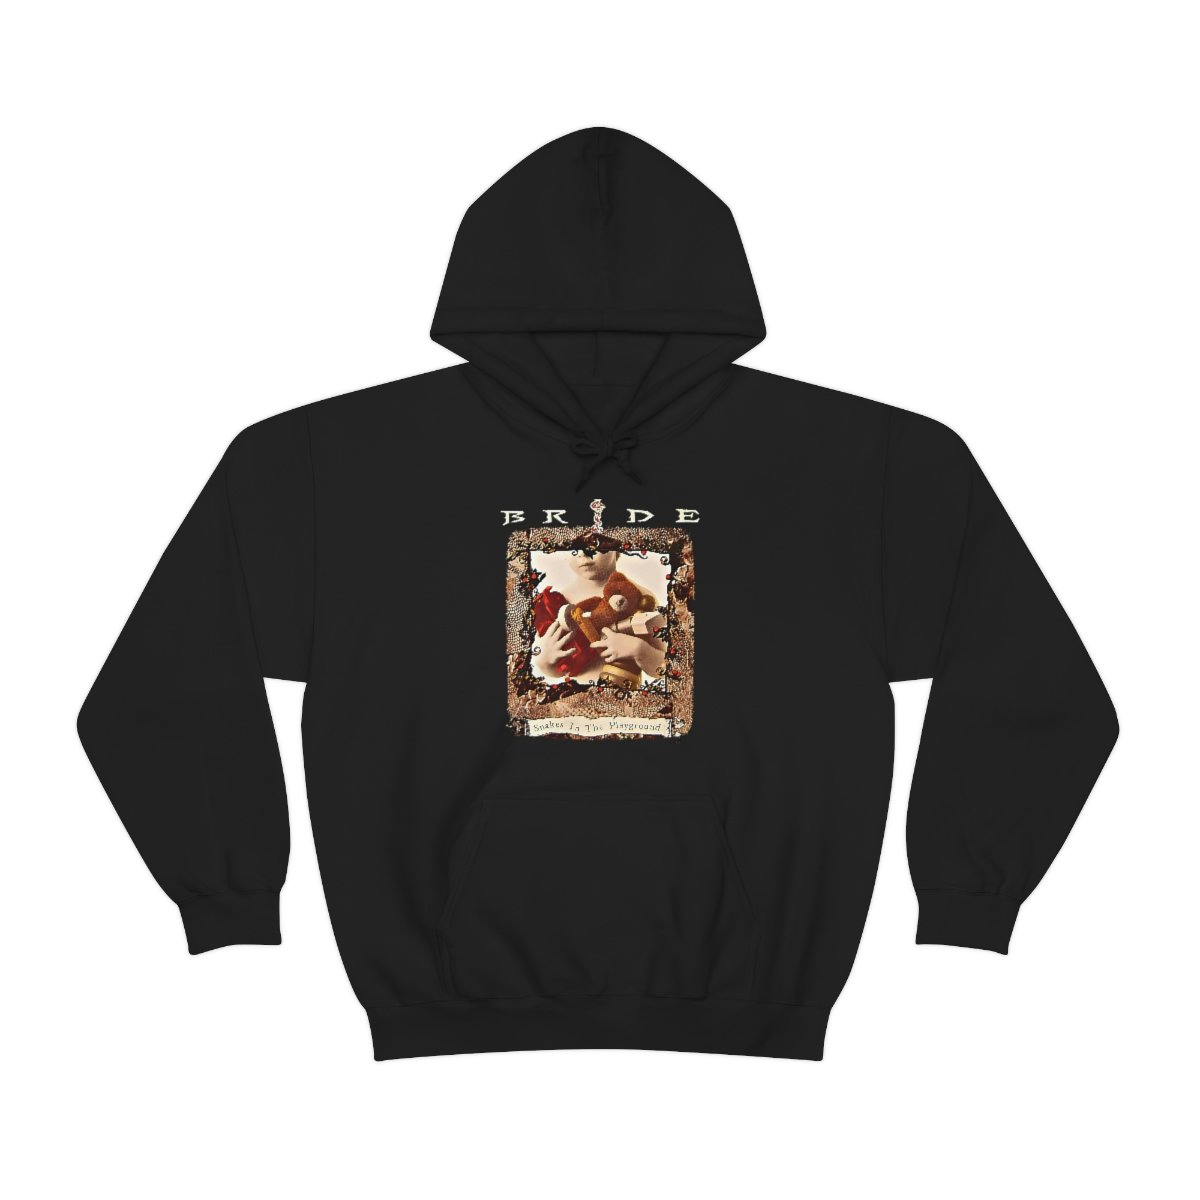 Bride – Snakes on the Playground Pullover Hooded Sweatshirt